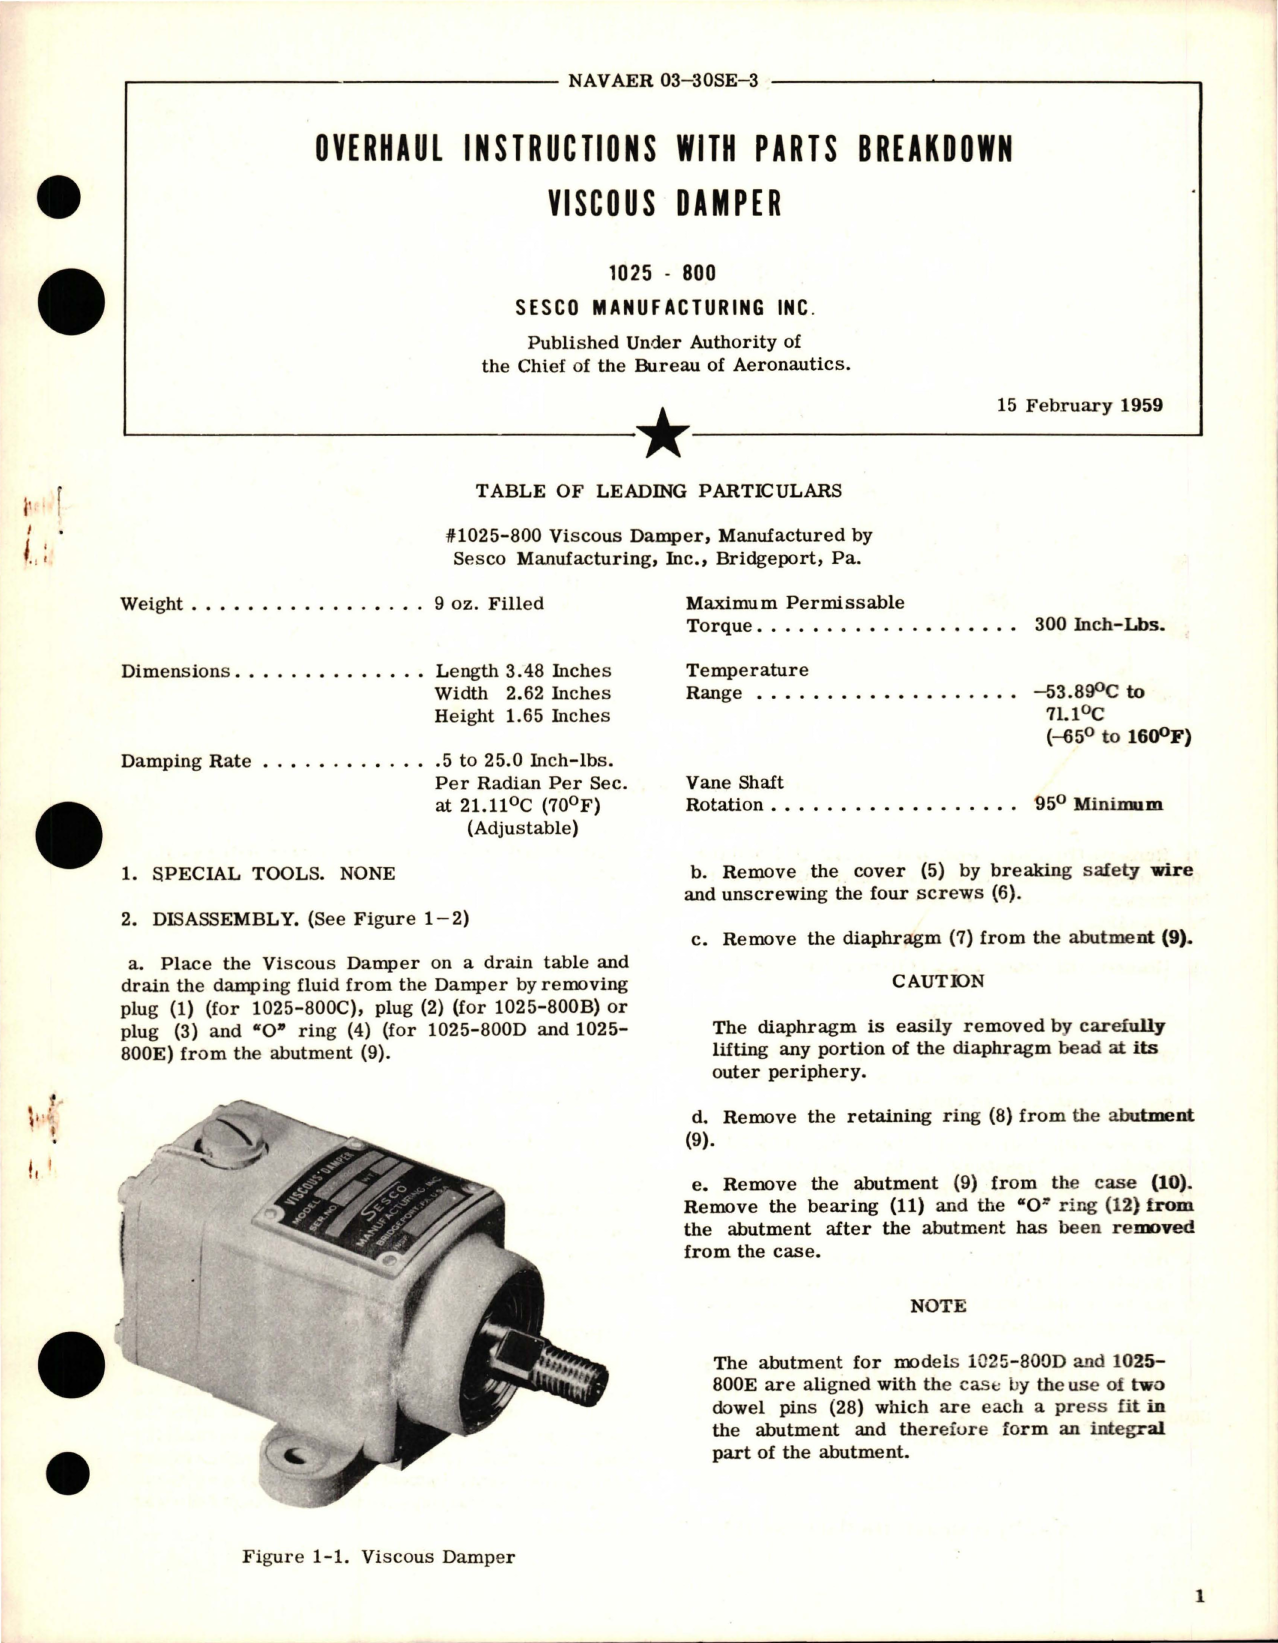 Sample page 1 from AirCorps Library document: Overhaul Instructions with Parts Breakdown for Viscous Damper - 1025 - 800